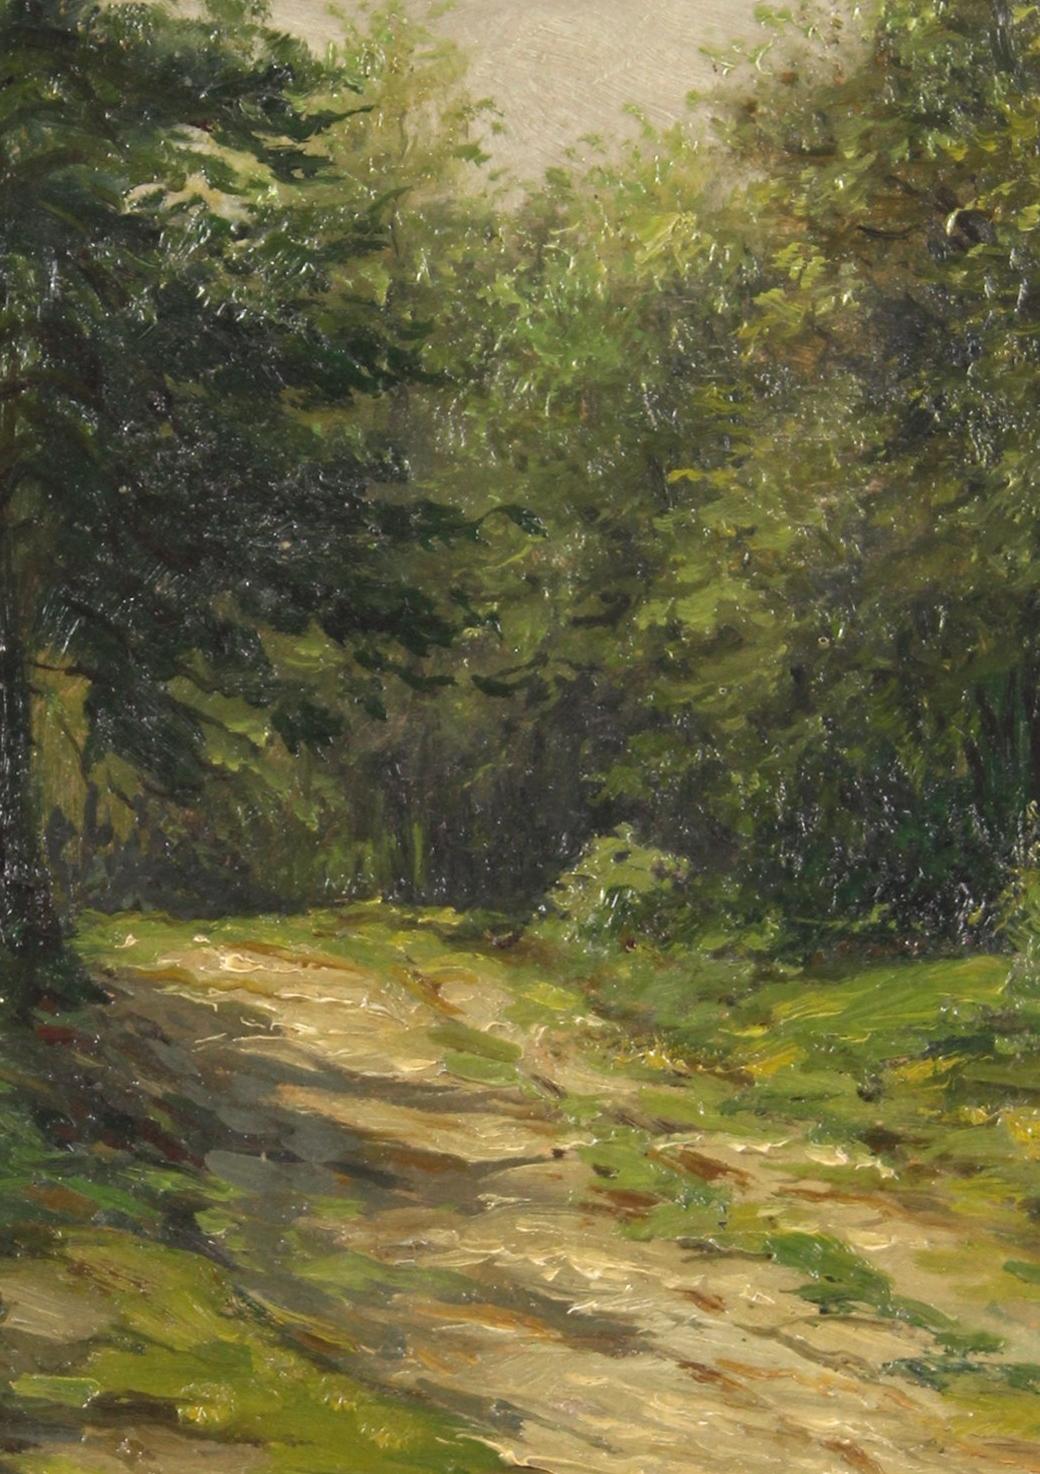 Sunny woodland path - A brightly lit forest path as a space for imagination - - Painting by Wilhelm Schütze